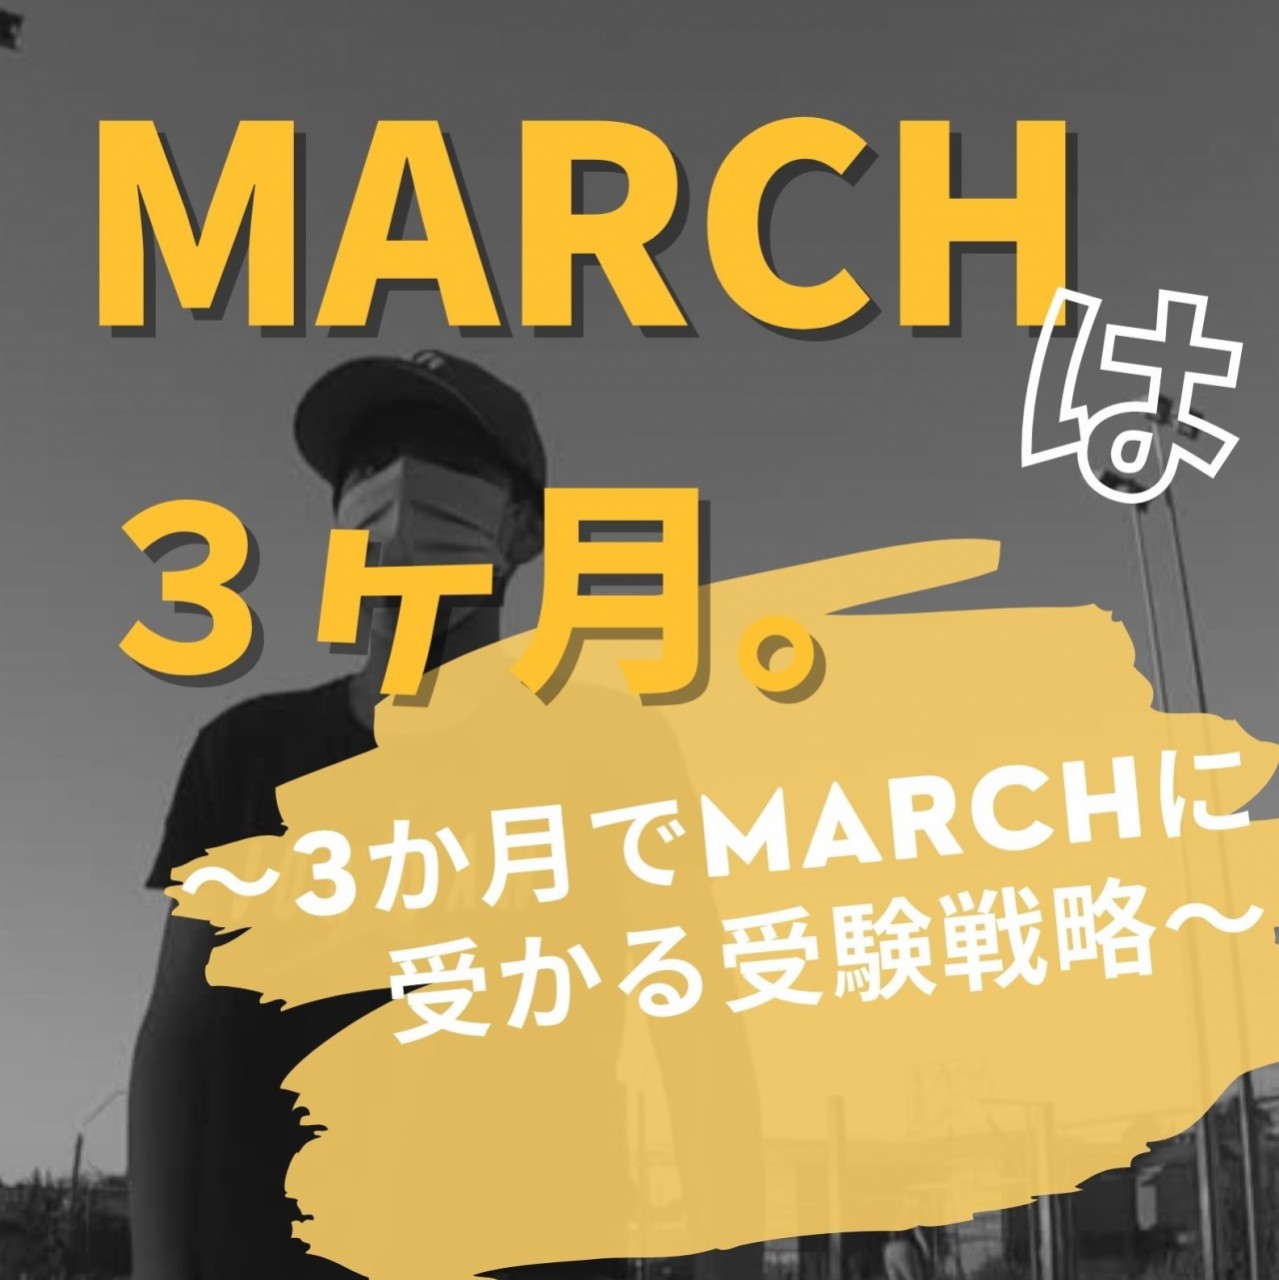 MARCHは3ヵ月。〜3ヵ月でMARCHに受かる受験戦略〜